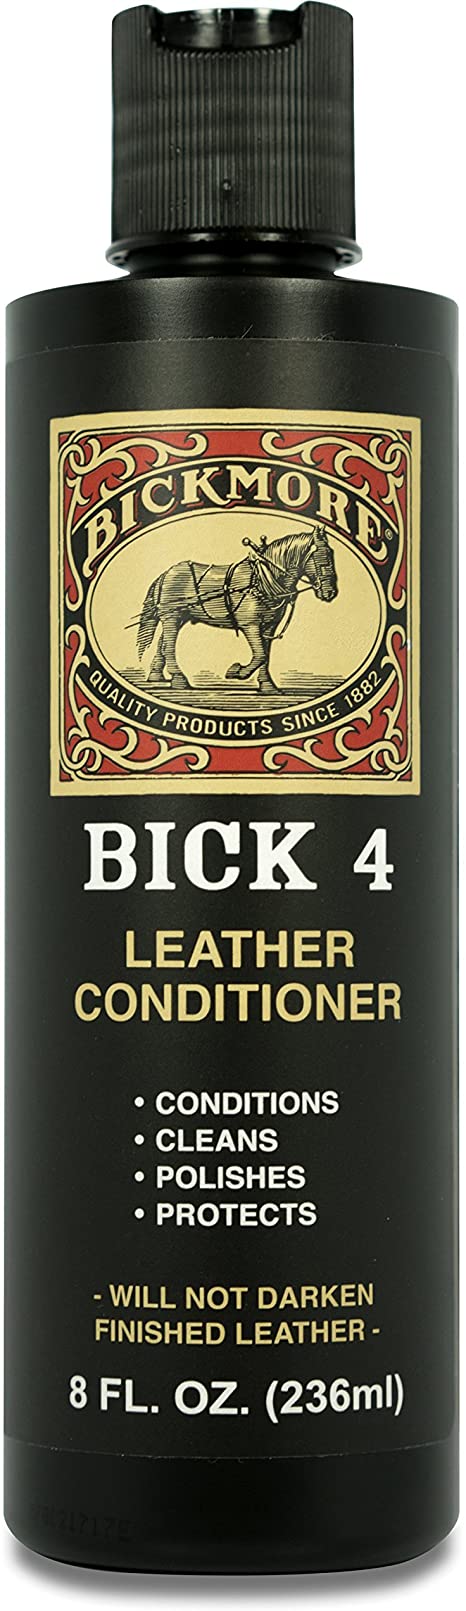 Bickmore Bick 4 Leather Conditioner 8 oz - Best Since 1882 - Cleaner & Conditioner - Restore Polish & Protect All Smooth Finished Leathers